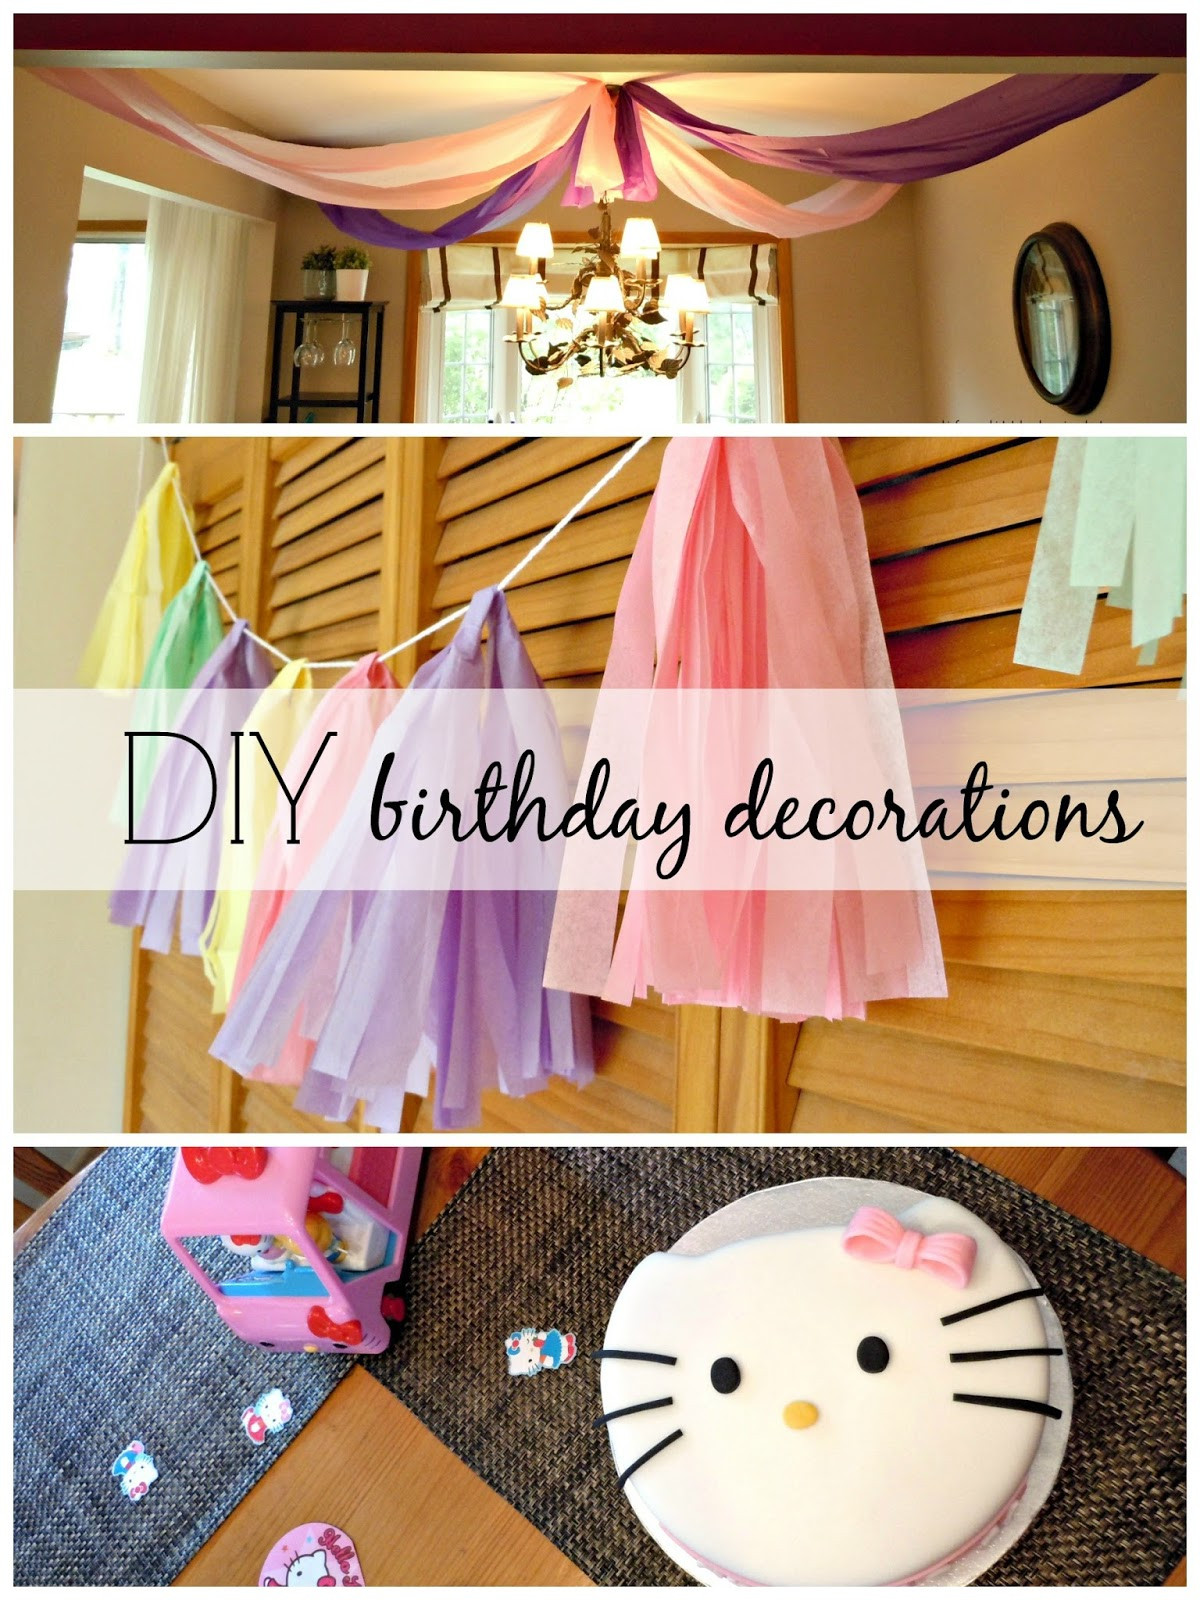 DIY Birthday Decorations
 Birthday Party DIY decorations Life a Little Brighter